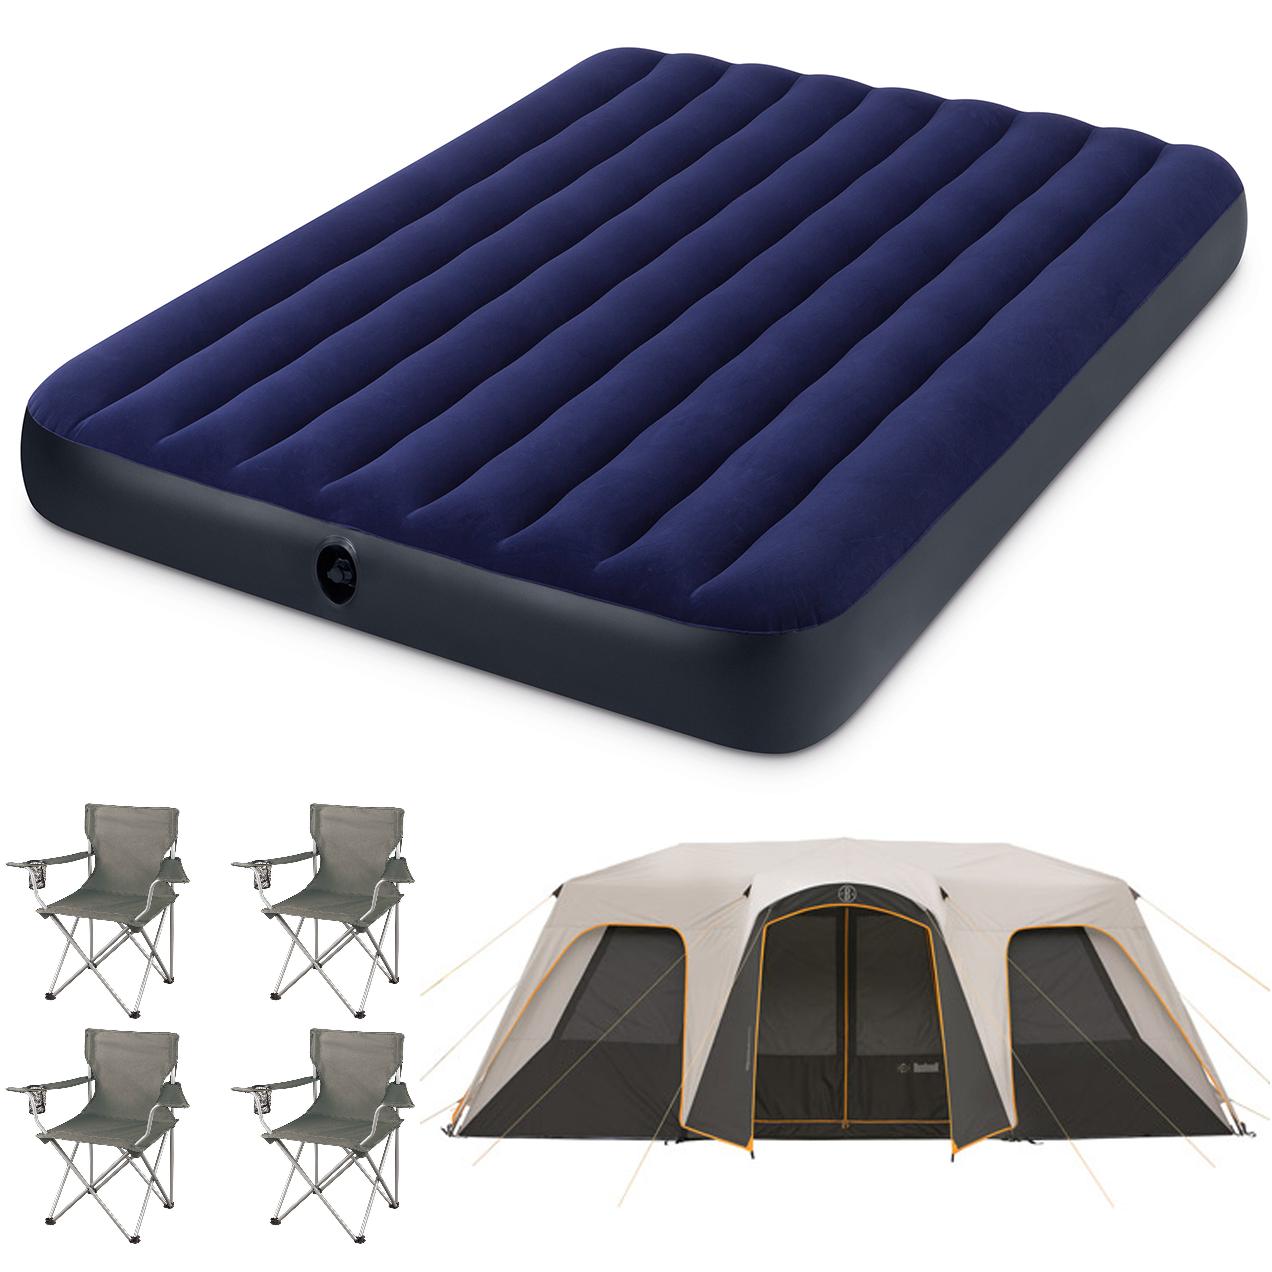 Bushnell 12 Person Instant Cabin Tent with 2 Bonus Queen Airbeds and 4 Chairs Value Bundle - image 1 of 4